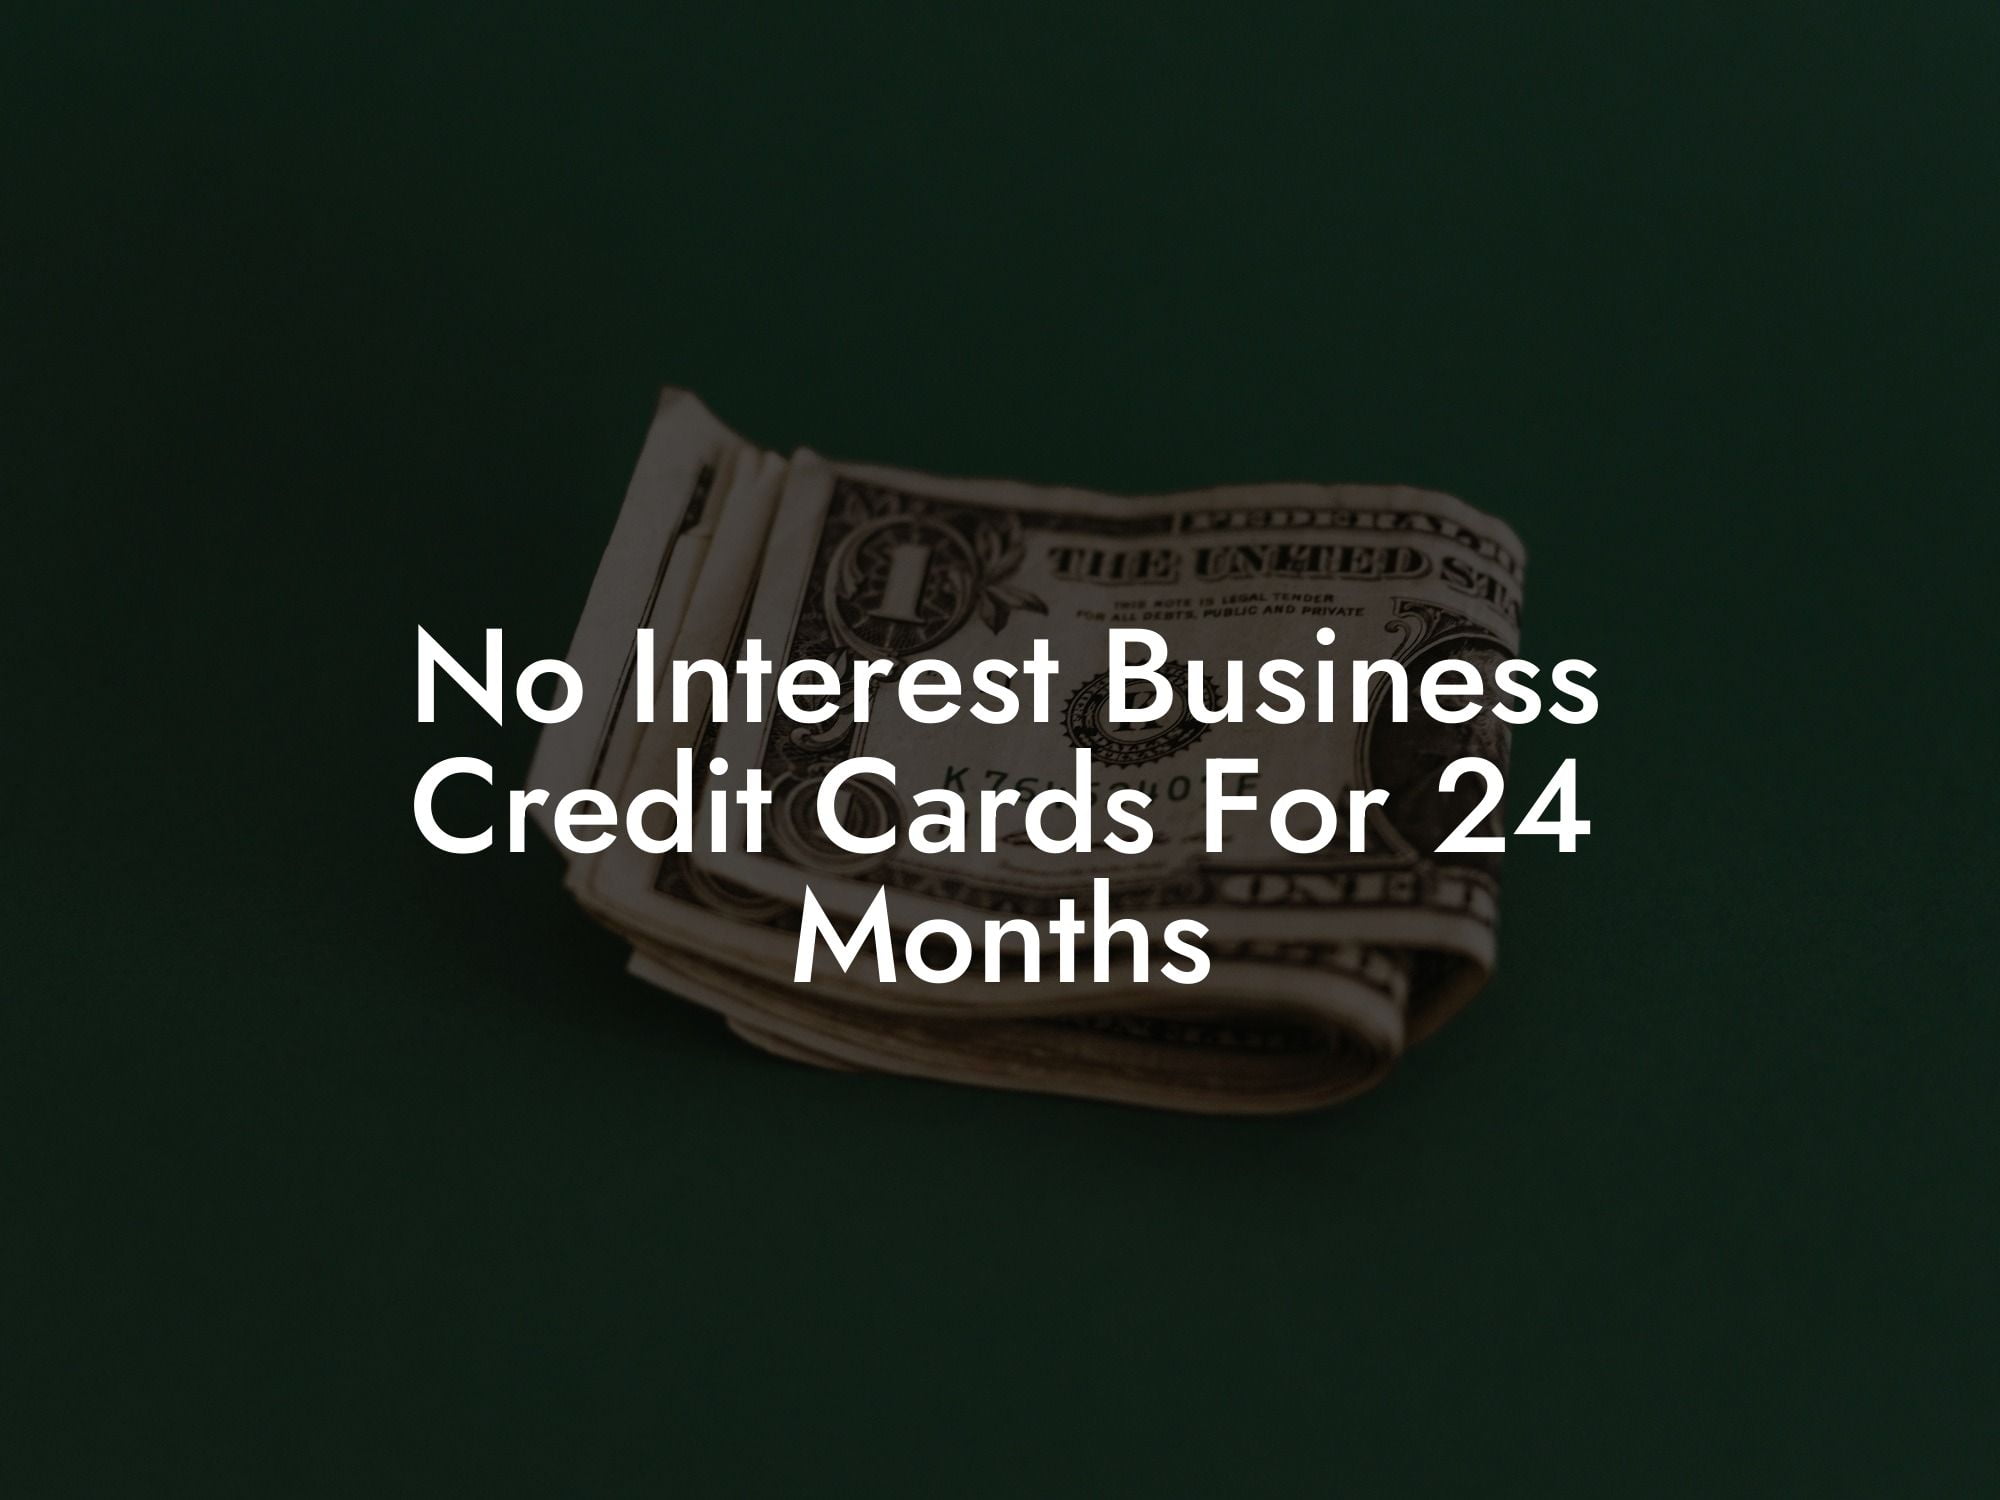 No Interest Business Credit Cards For 24 Months